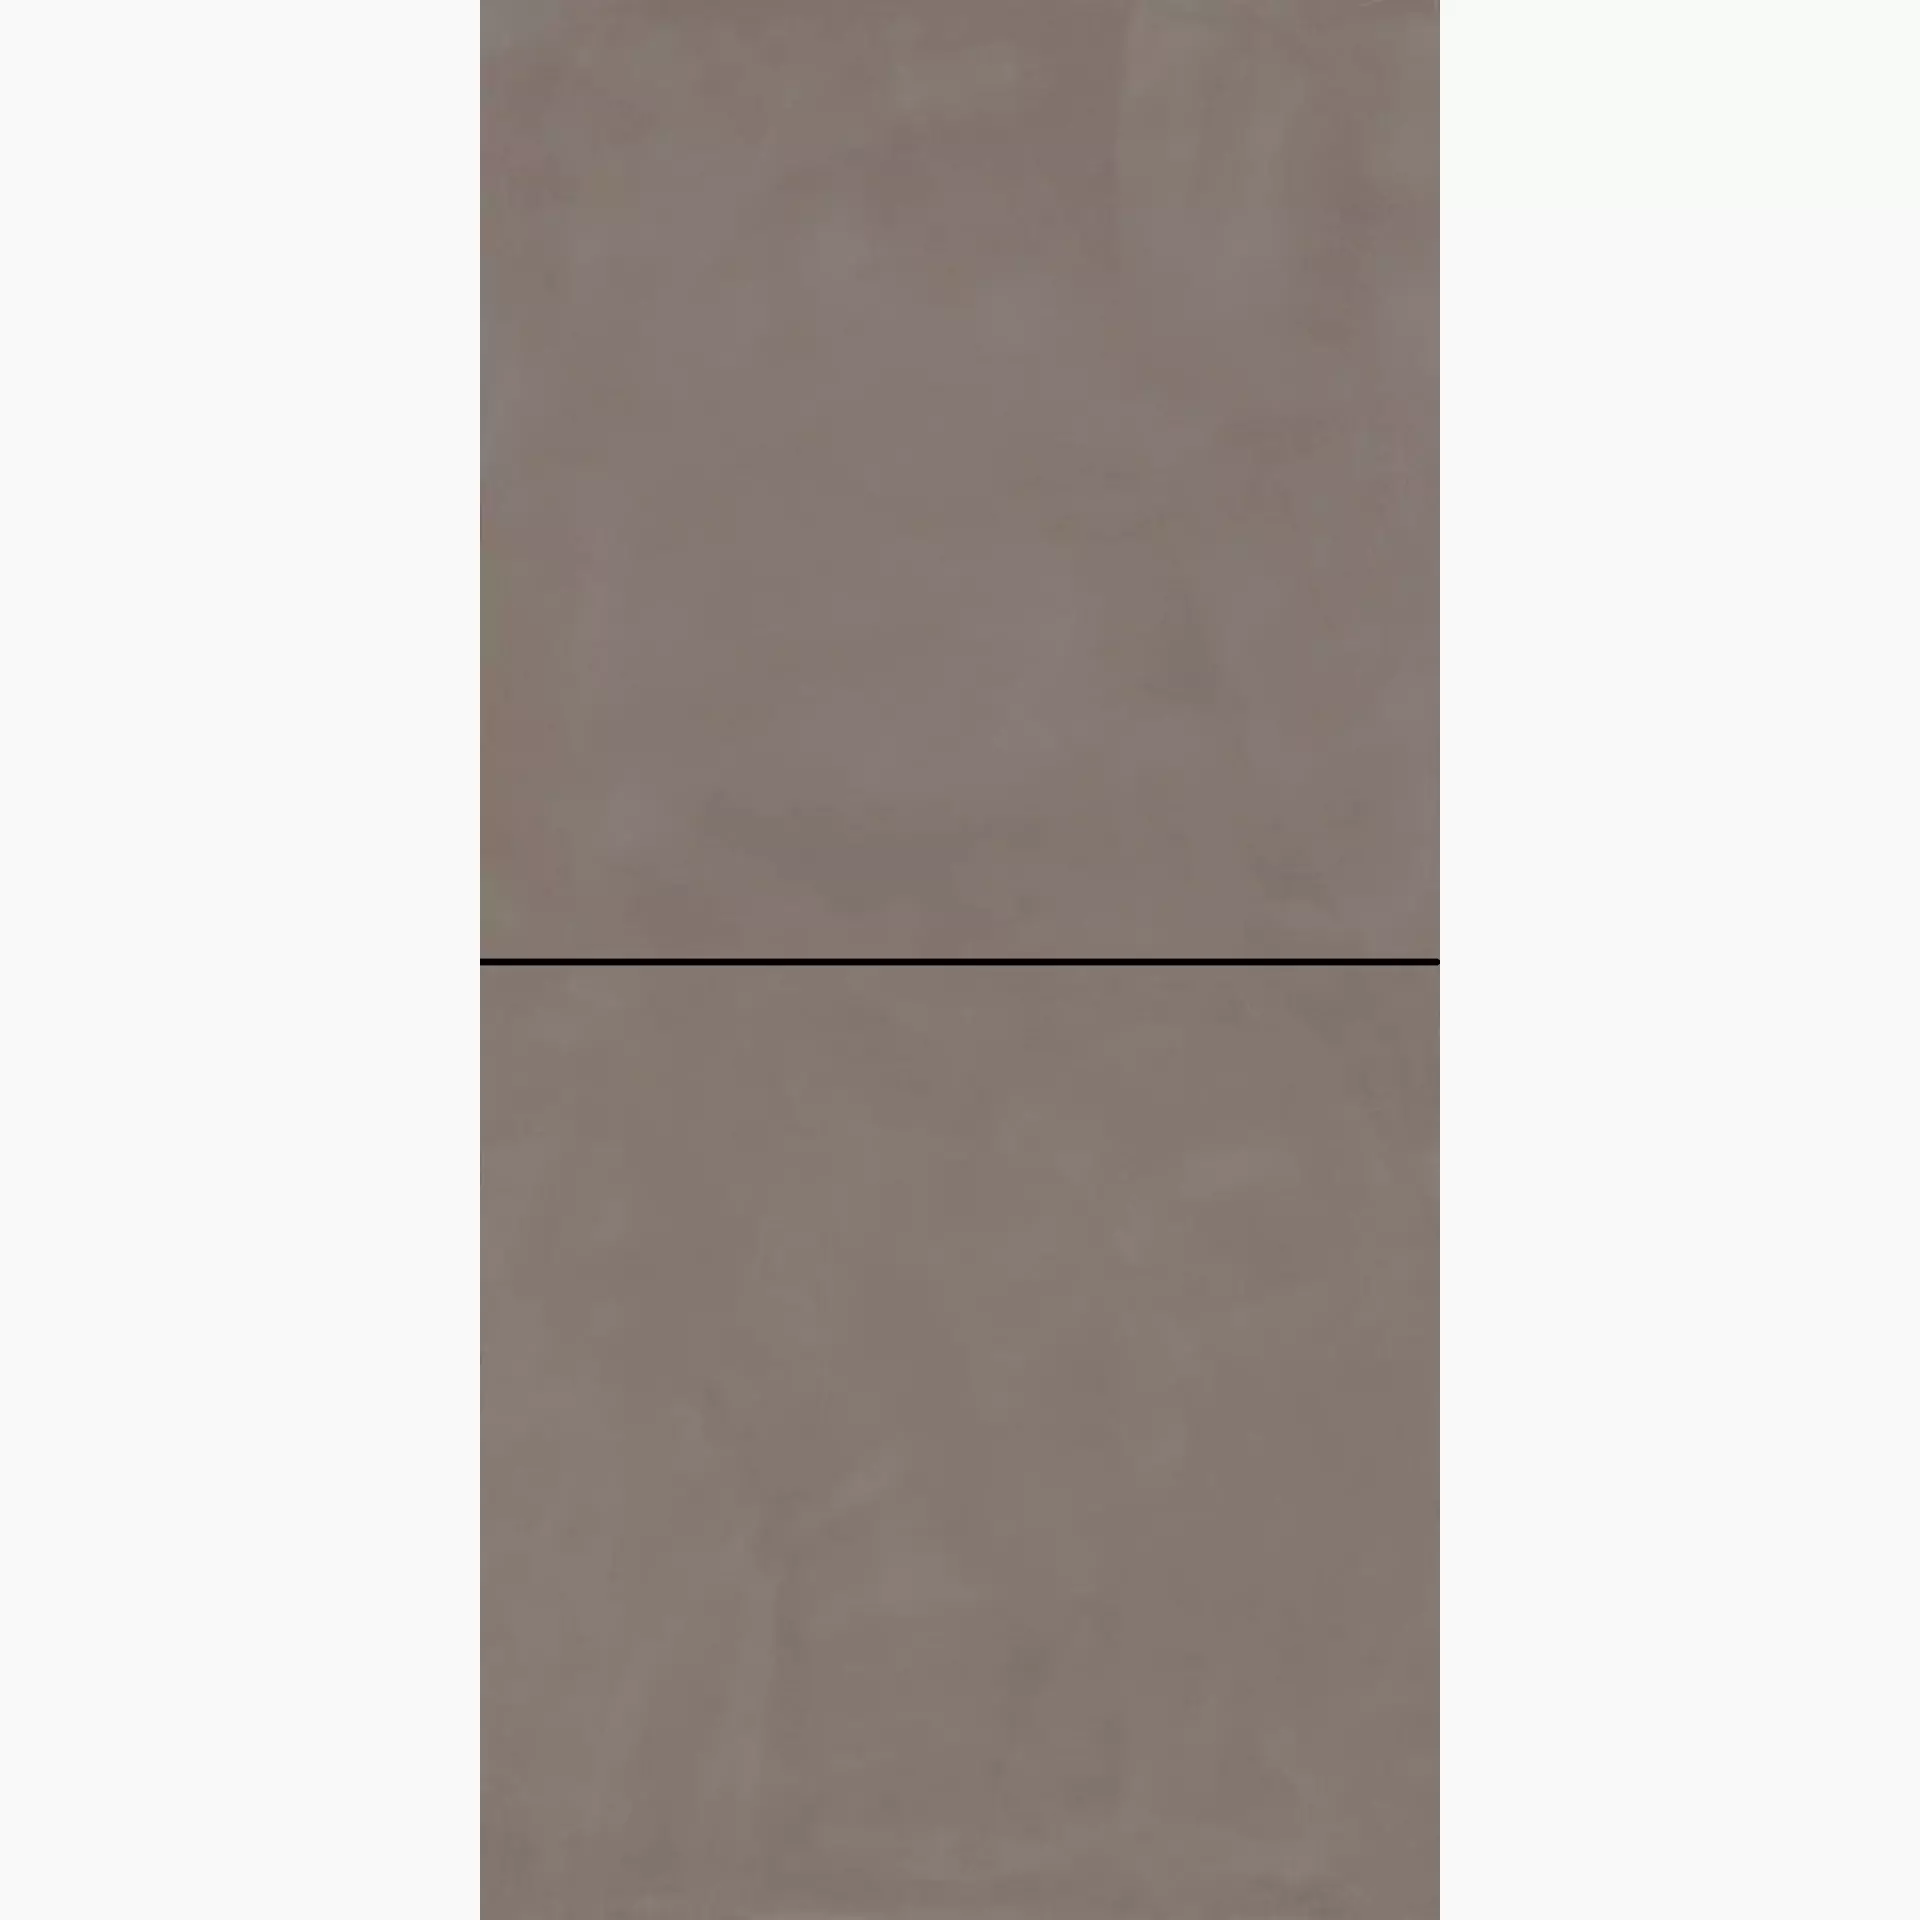 Fondovalle Res Art Mud Natural RES181 120x120cm rectified 6,5mm